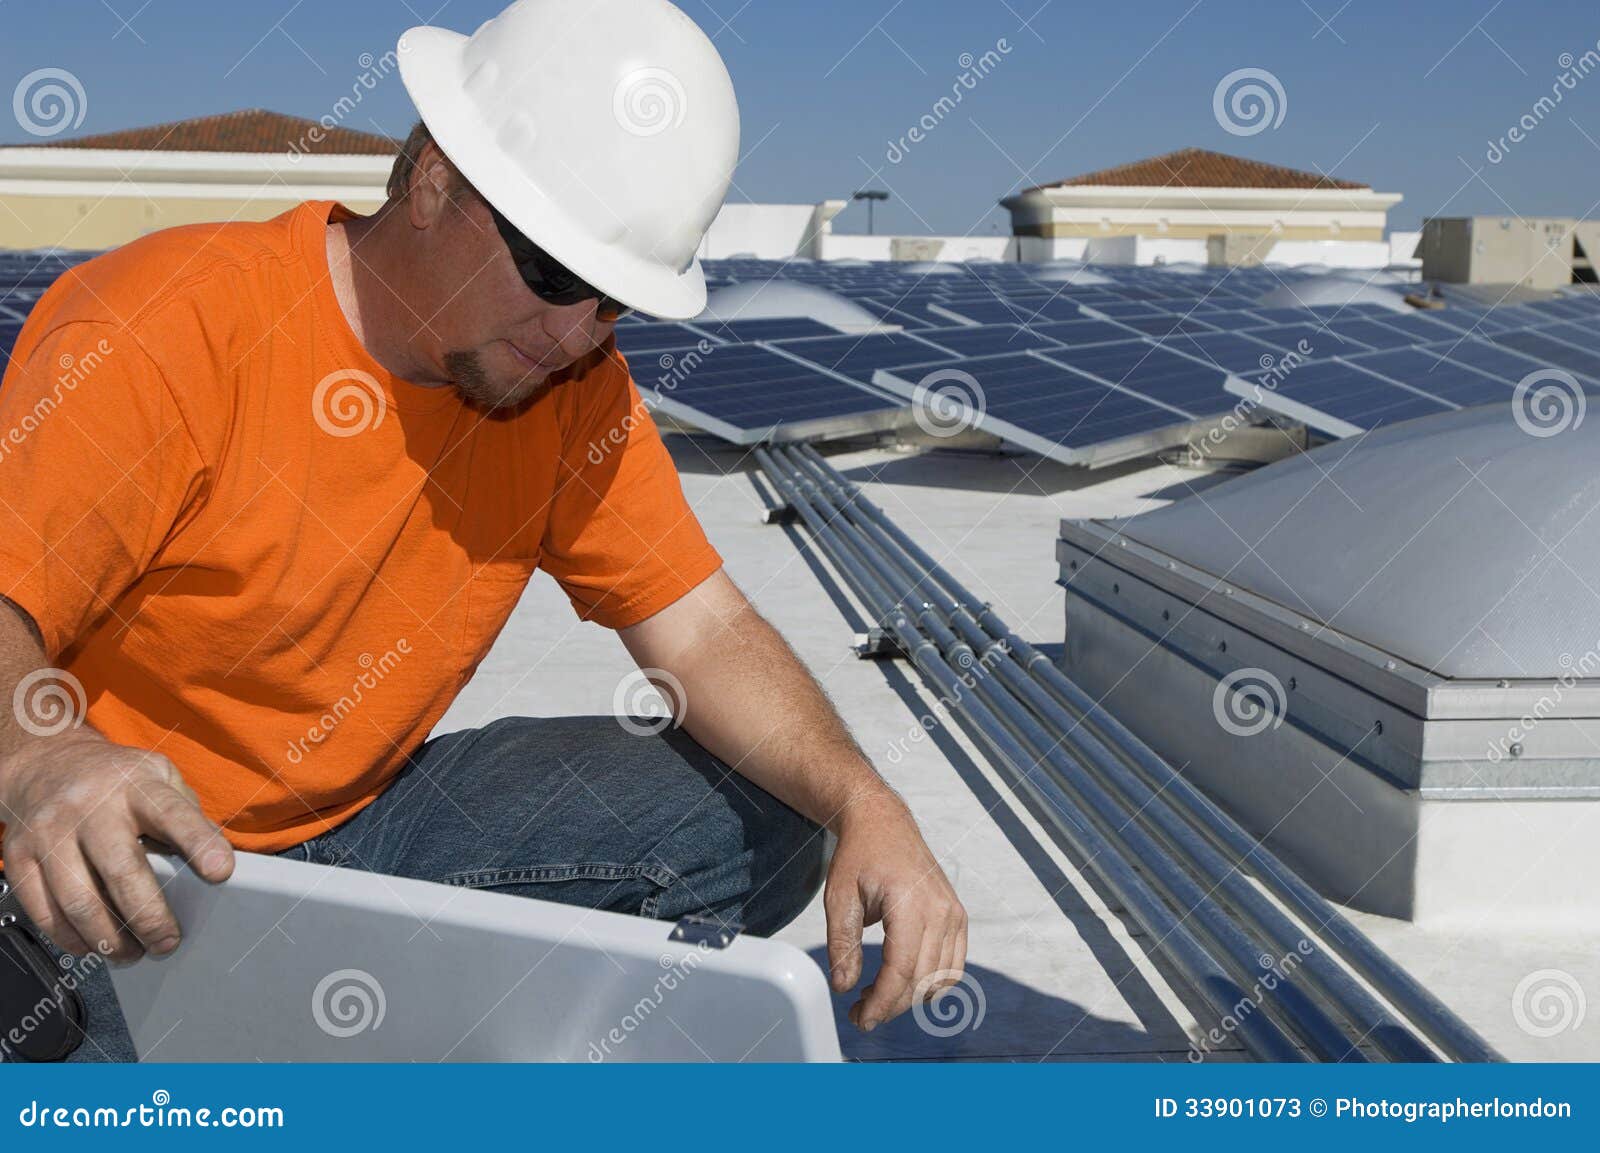 Engineer Working At Solar Power Plant Stock Photos - Image: 33901073